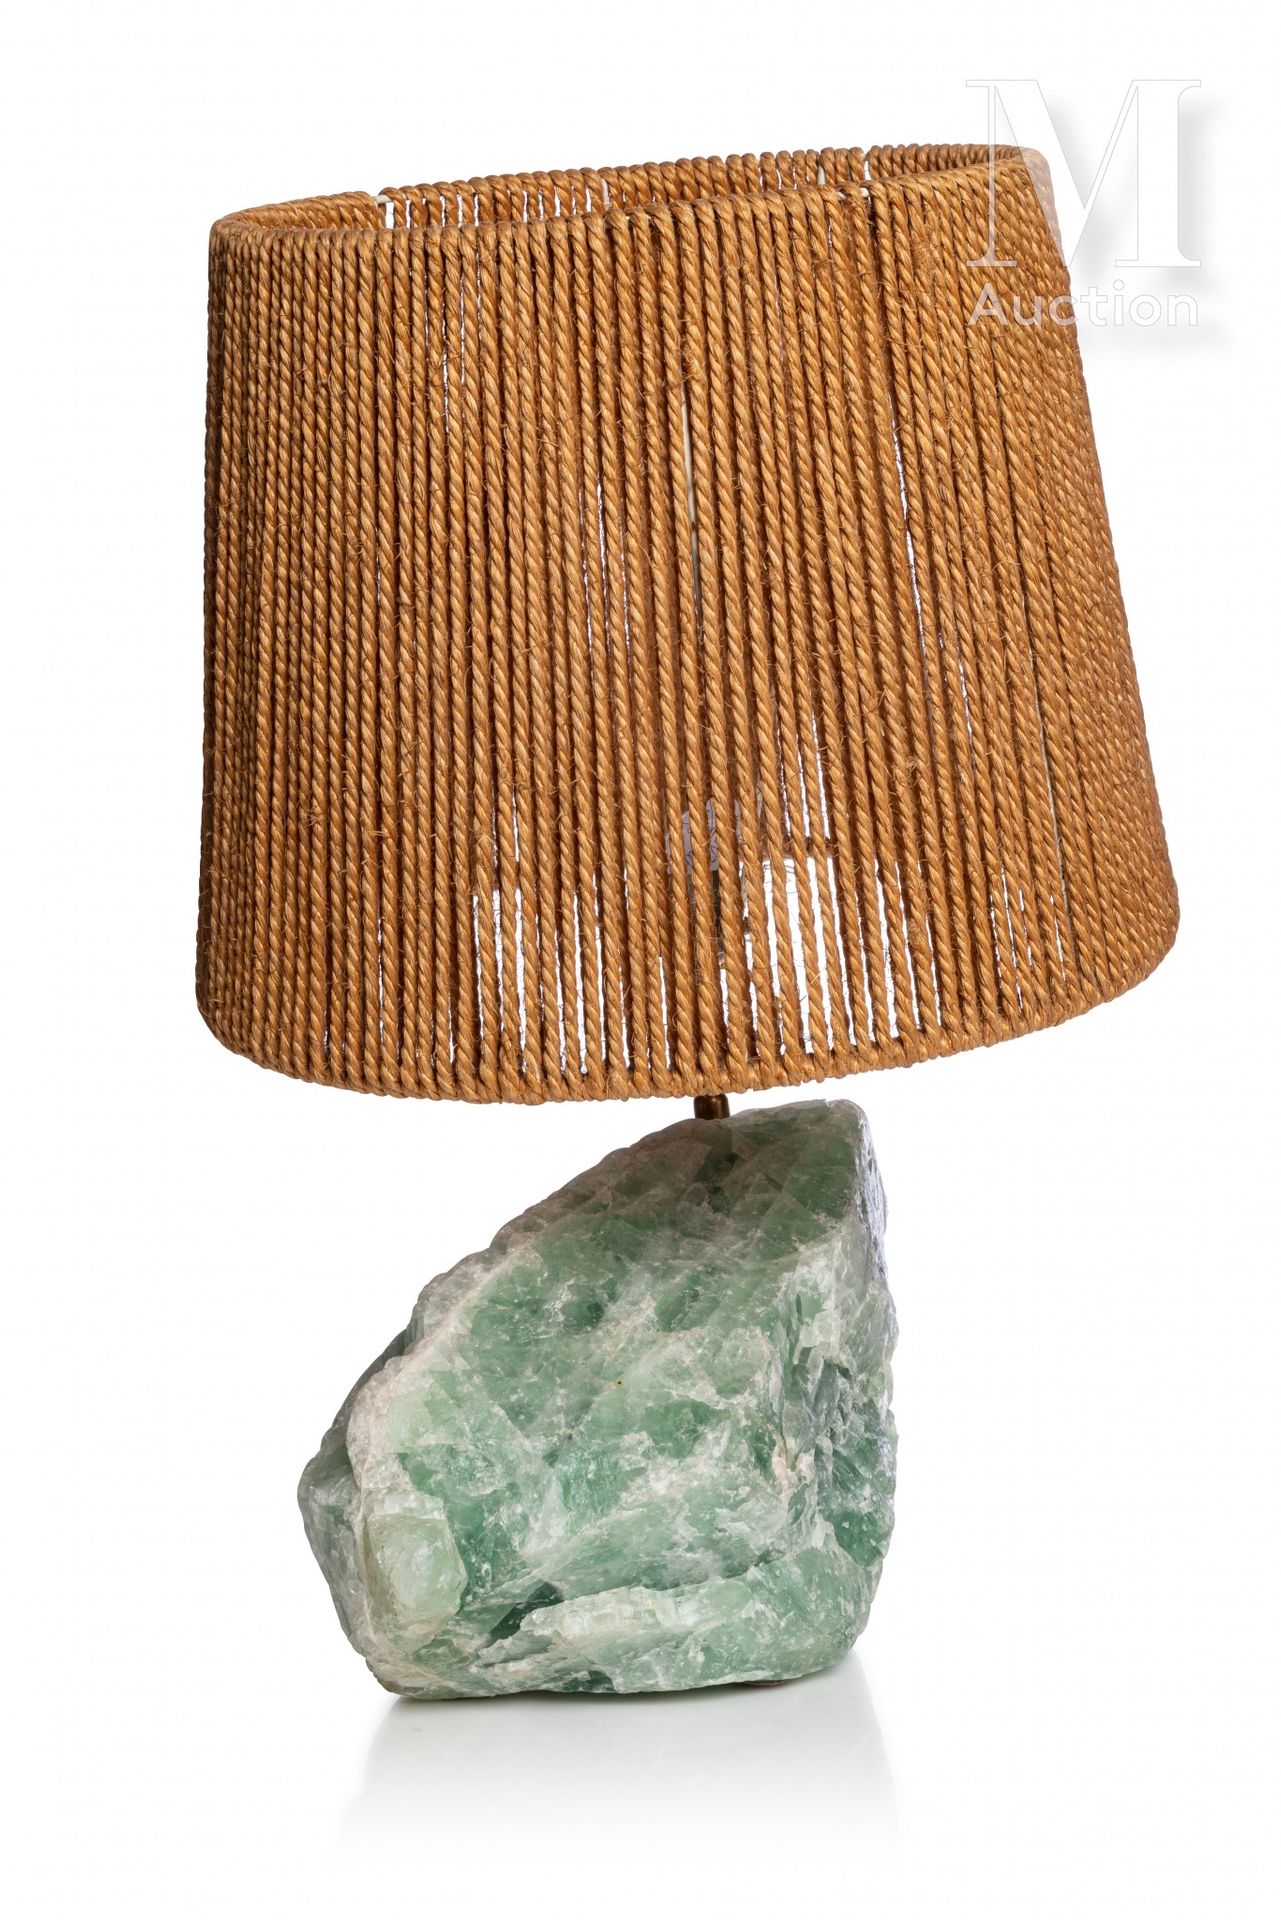 TRAVAIL FRANÇAIS French work

Table lamp made of a block of green stone.

Lampsh&hellip;